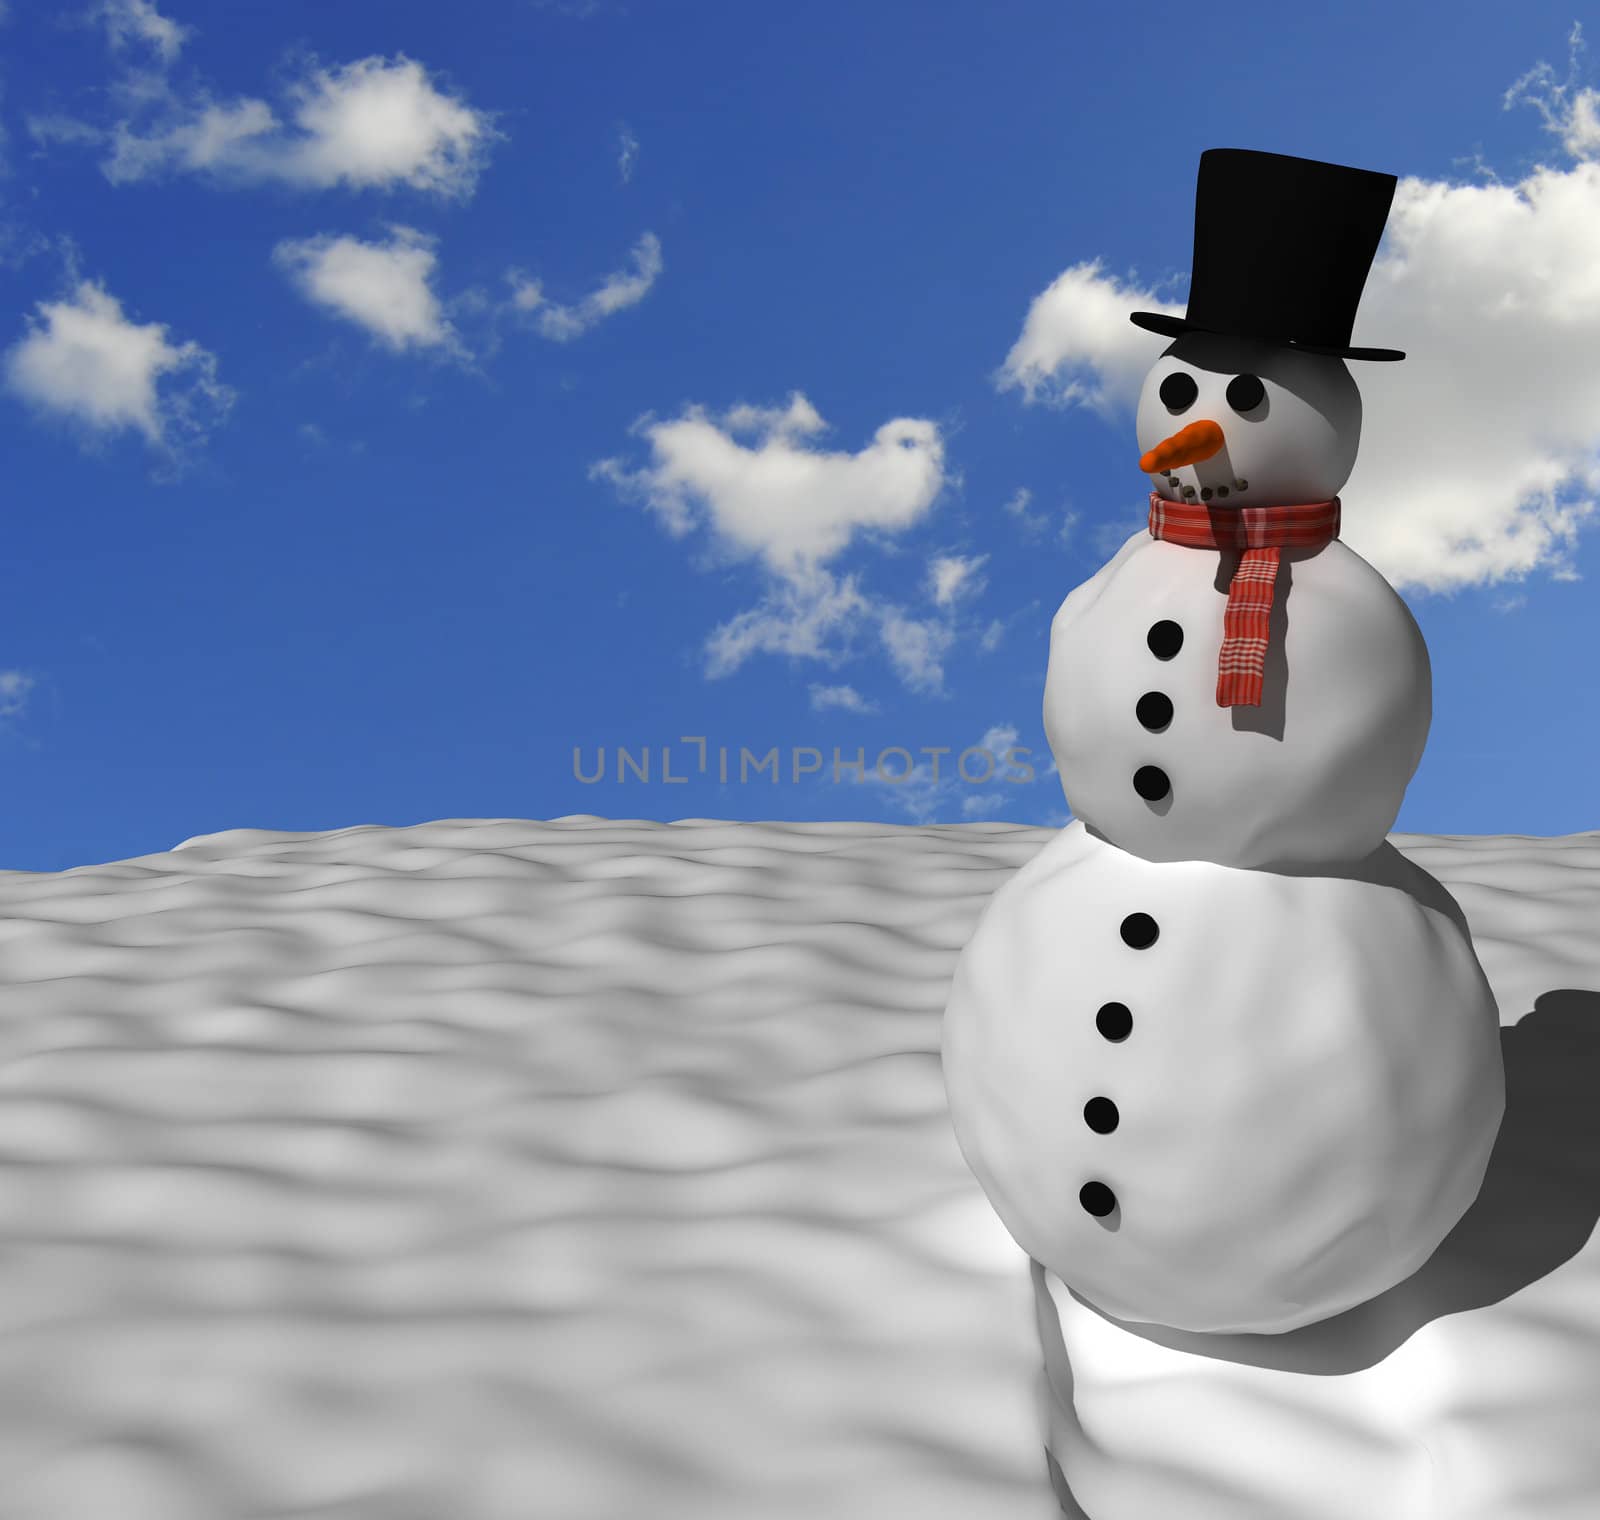 Nice looking snowman with perfect blue sky in the background.